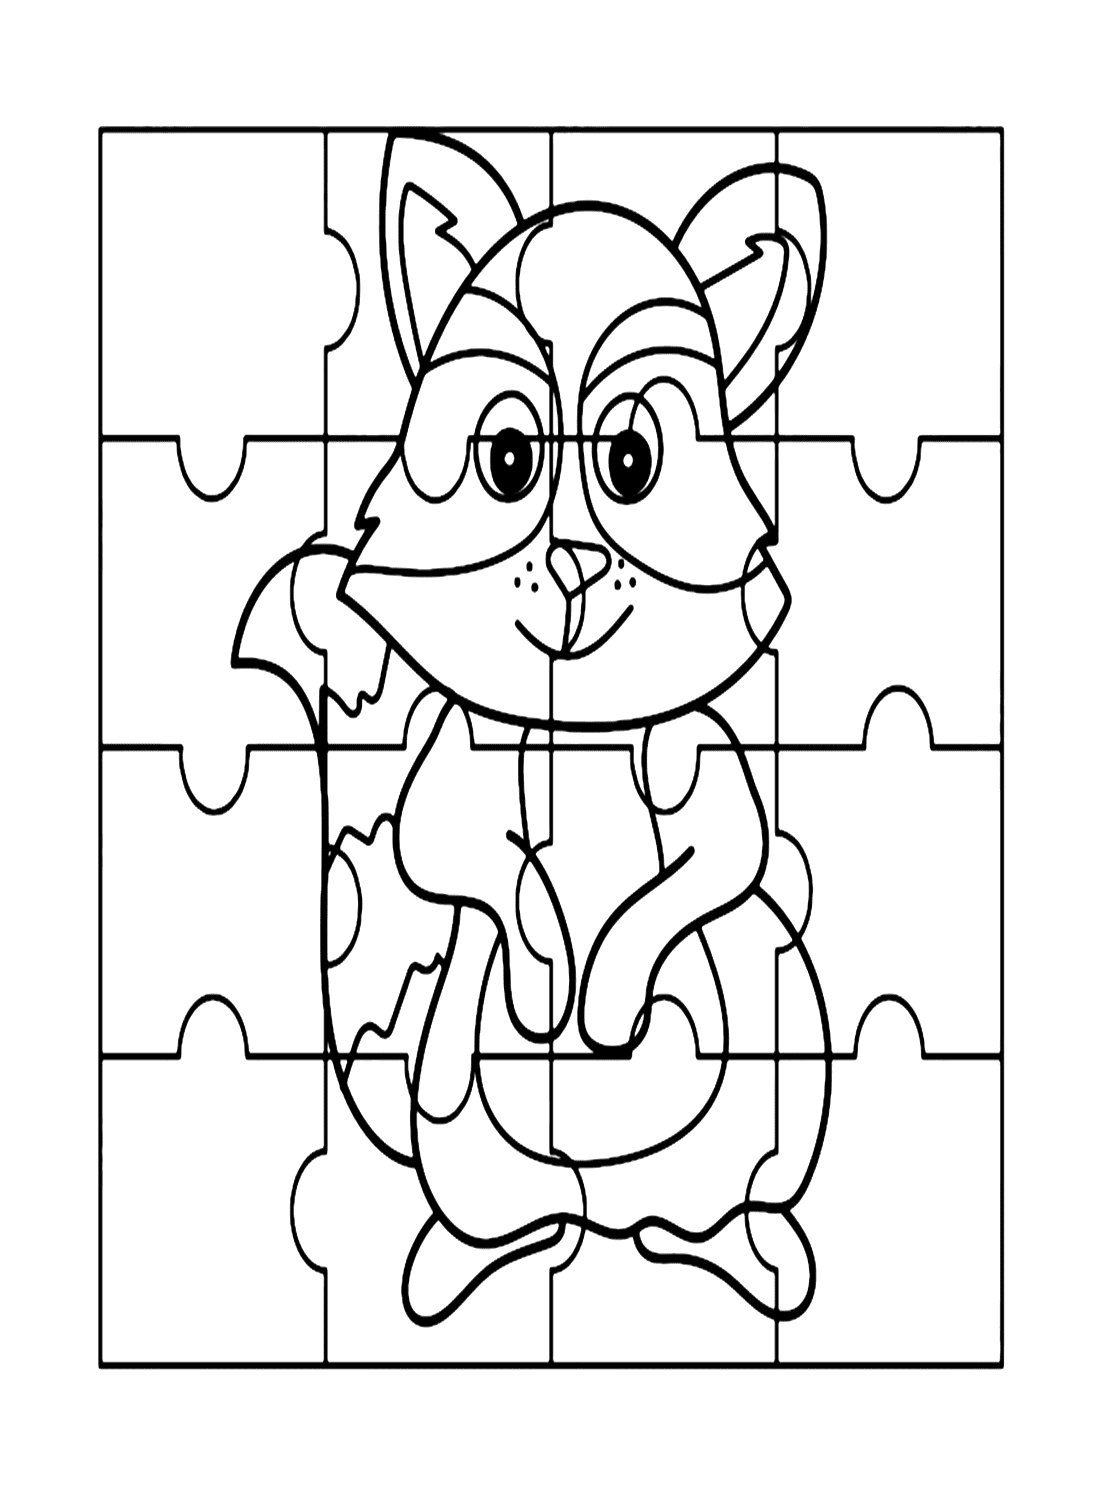 Raccoon in jigsaw puzzle game coloring pages